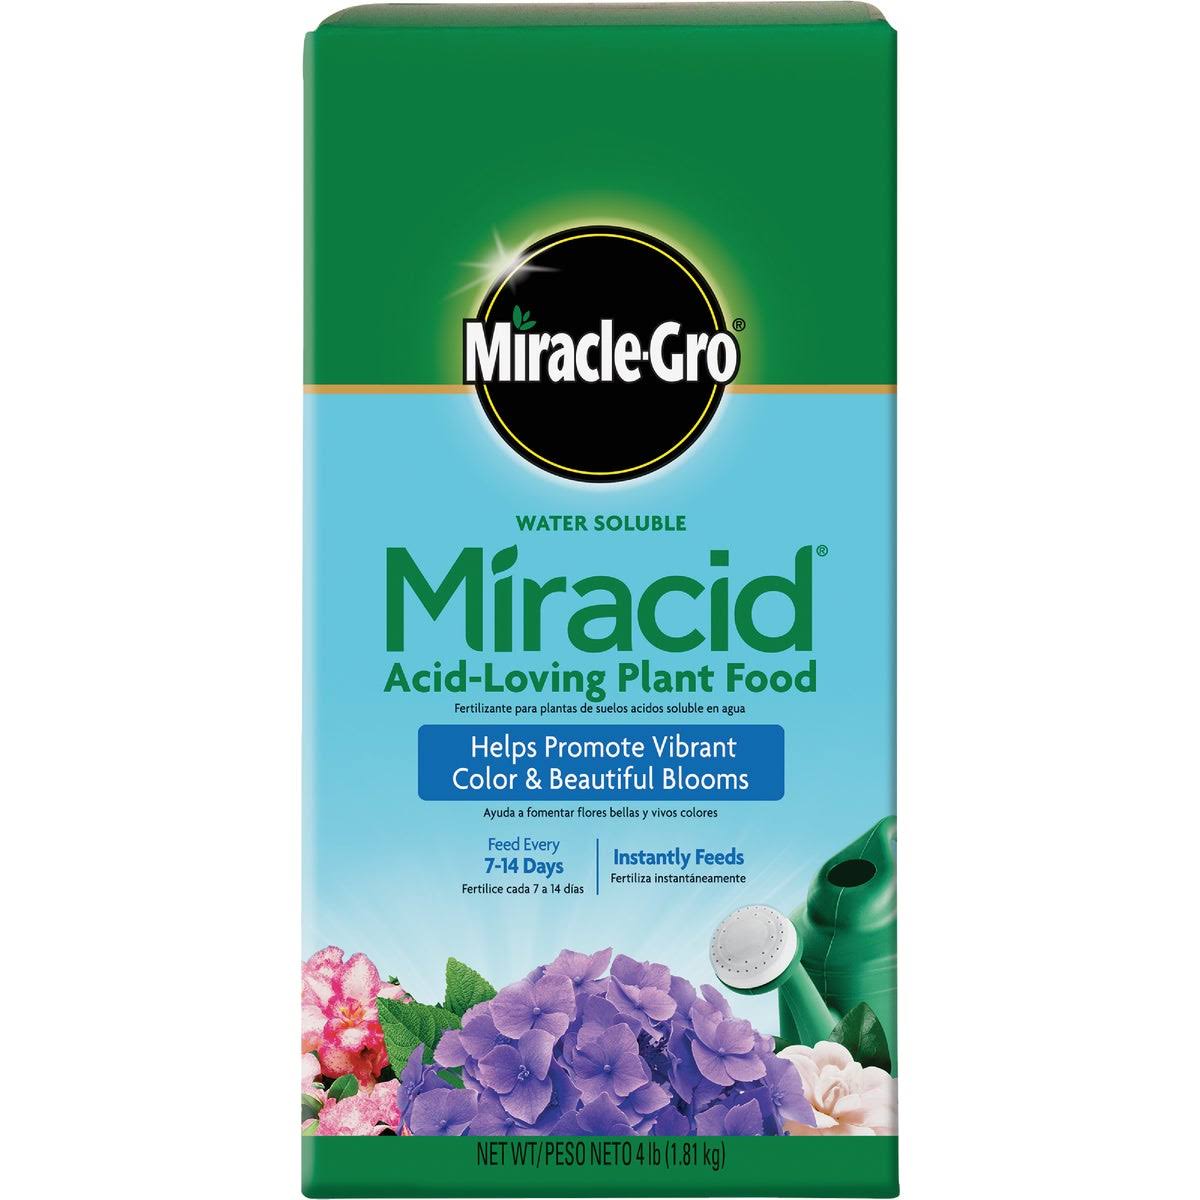 Miracle Gro Garden Pro Water Soluble Miracid Plant Food - 4lb